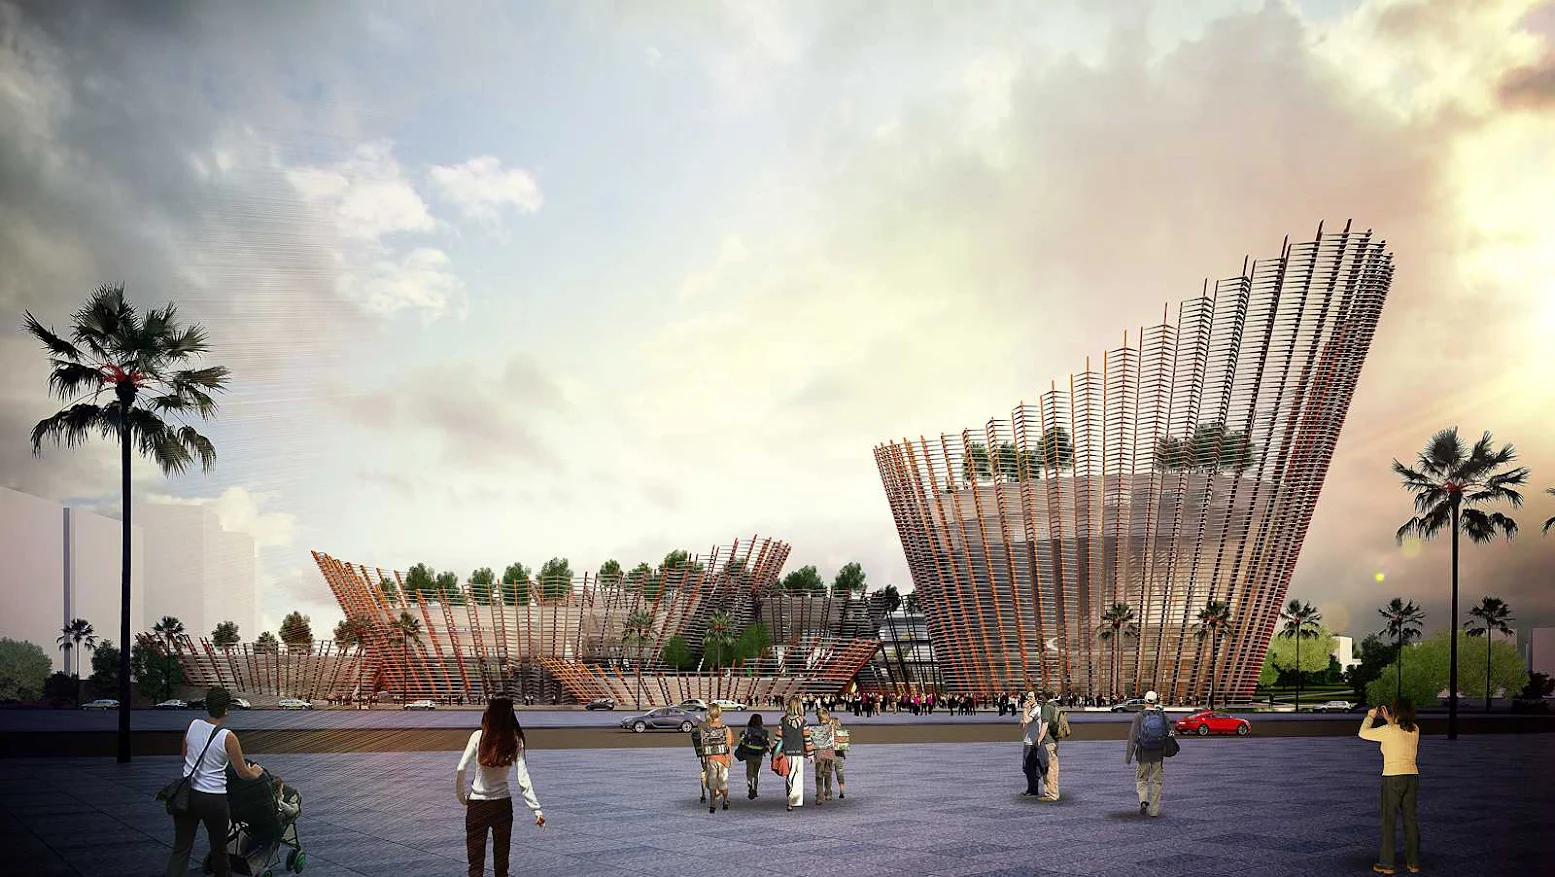 Taichung City Cultural Center competition by Maxthreads